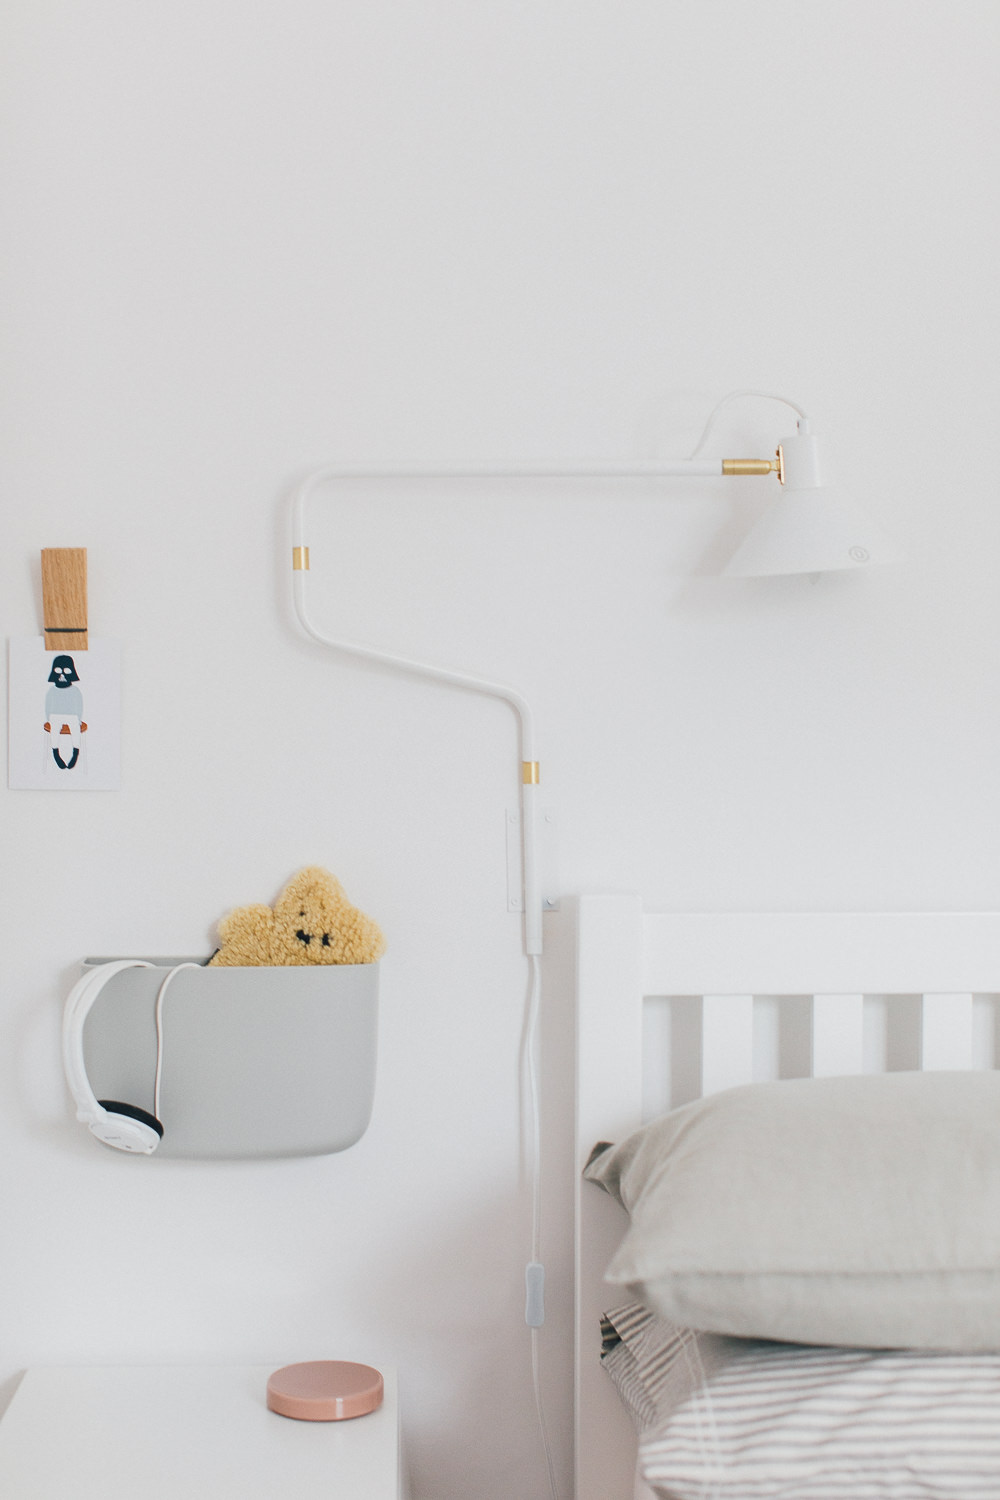 Statement wall light | Wall pockets | Childrens Room | Cloud decor | Peg wall hook | A modern neutral millennial pink bedroom for children with handmade furniture, personalised artwork and statement lighting